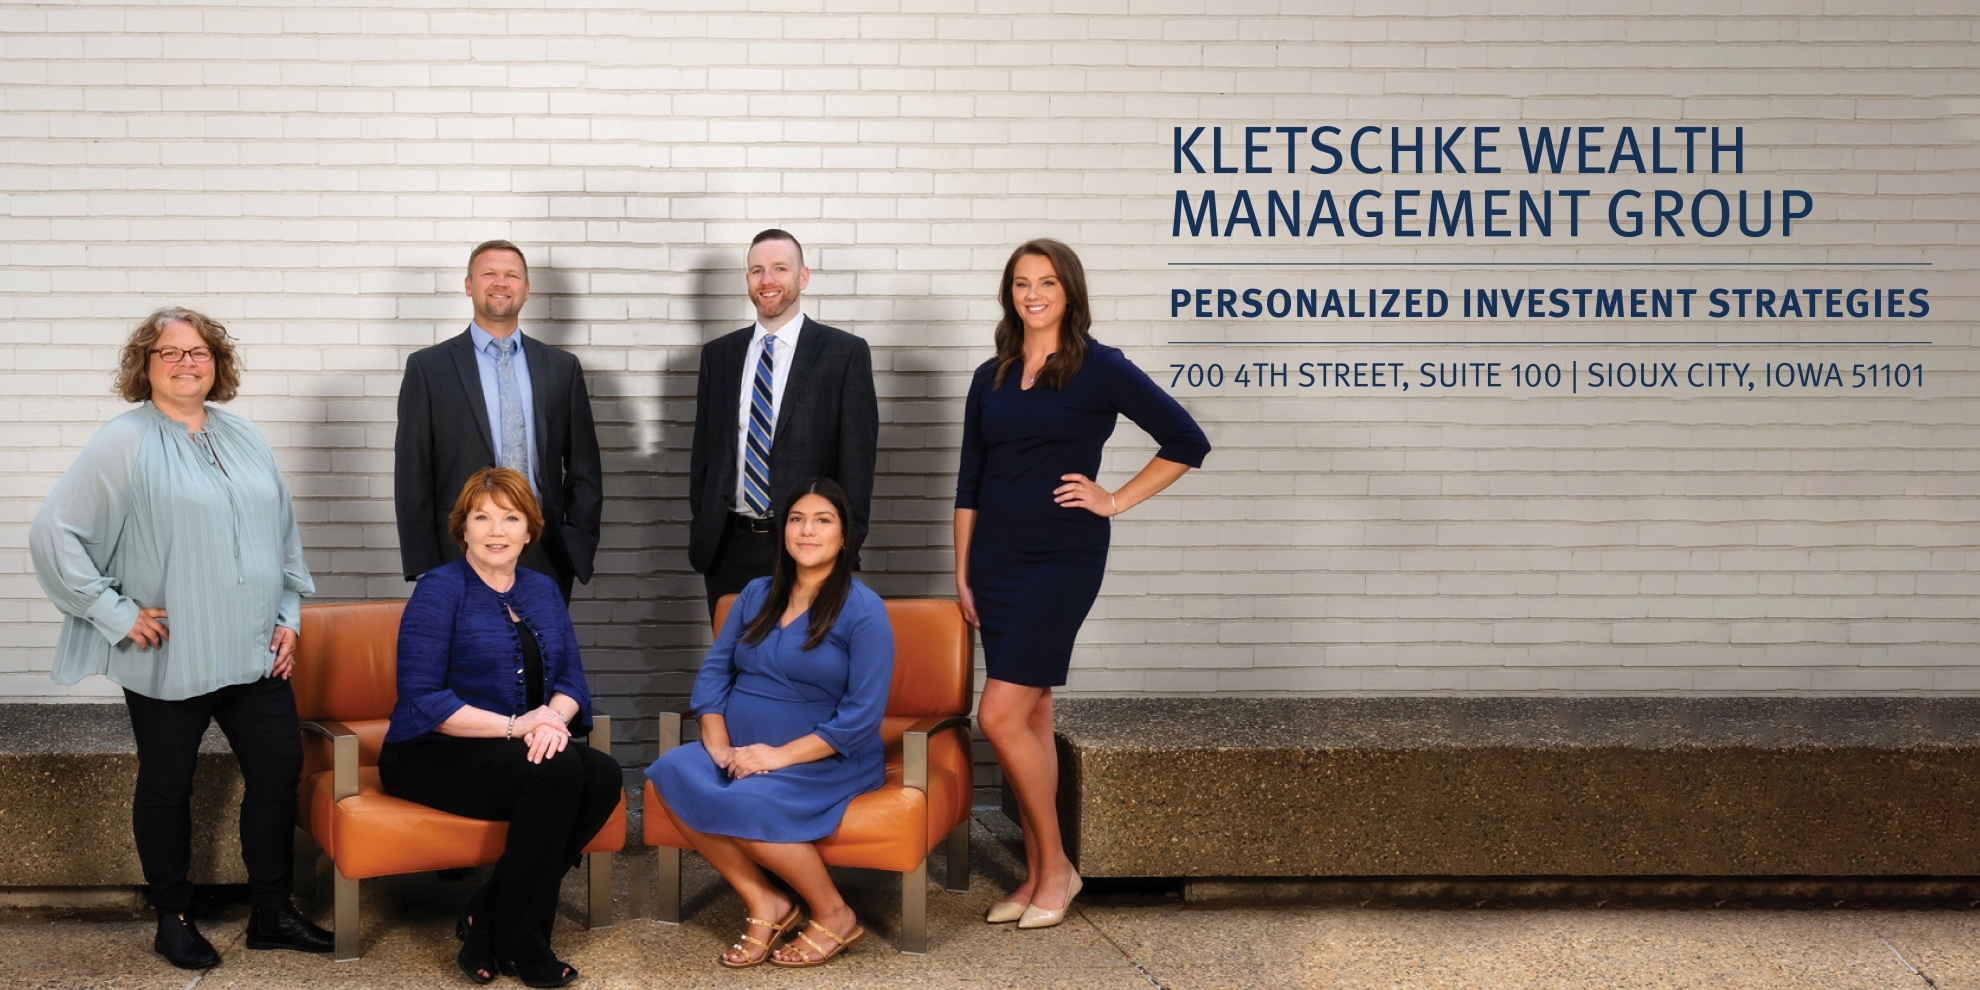 Kletschke Wealth Management Group Photo against a white brick wall; Kletschke Wealth Management Group; Personalized Investment Strategies; 700 4th Street, Suite 100 | Sioux City, Iowa 51101